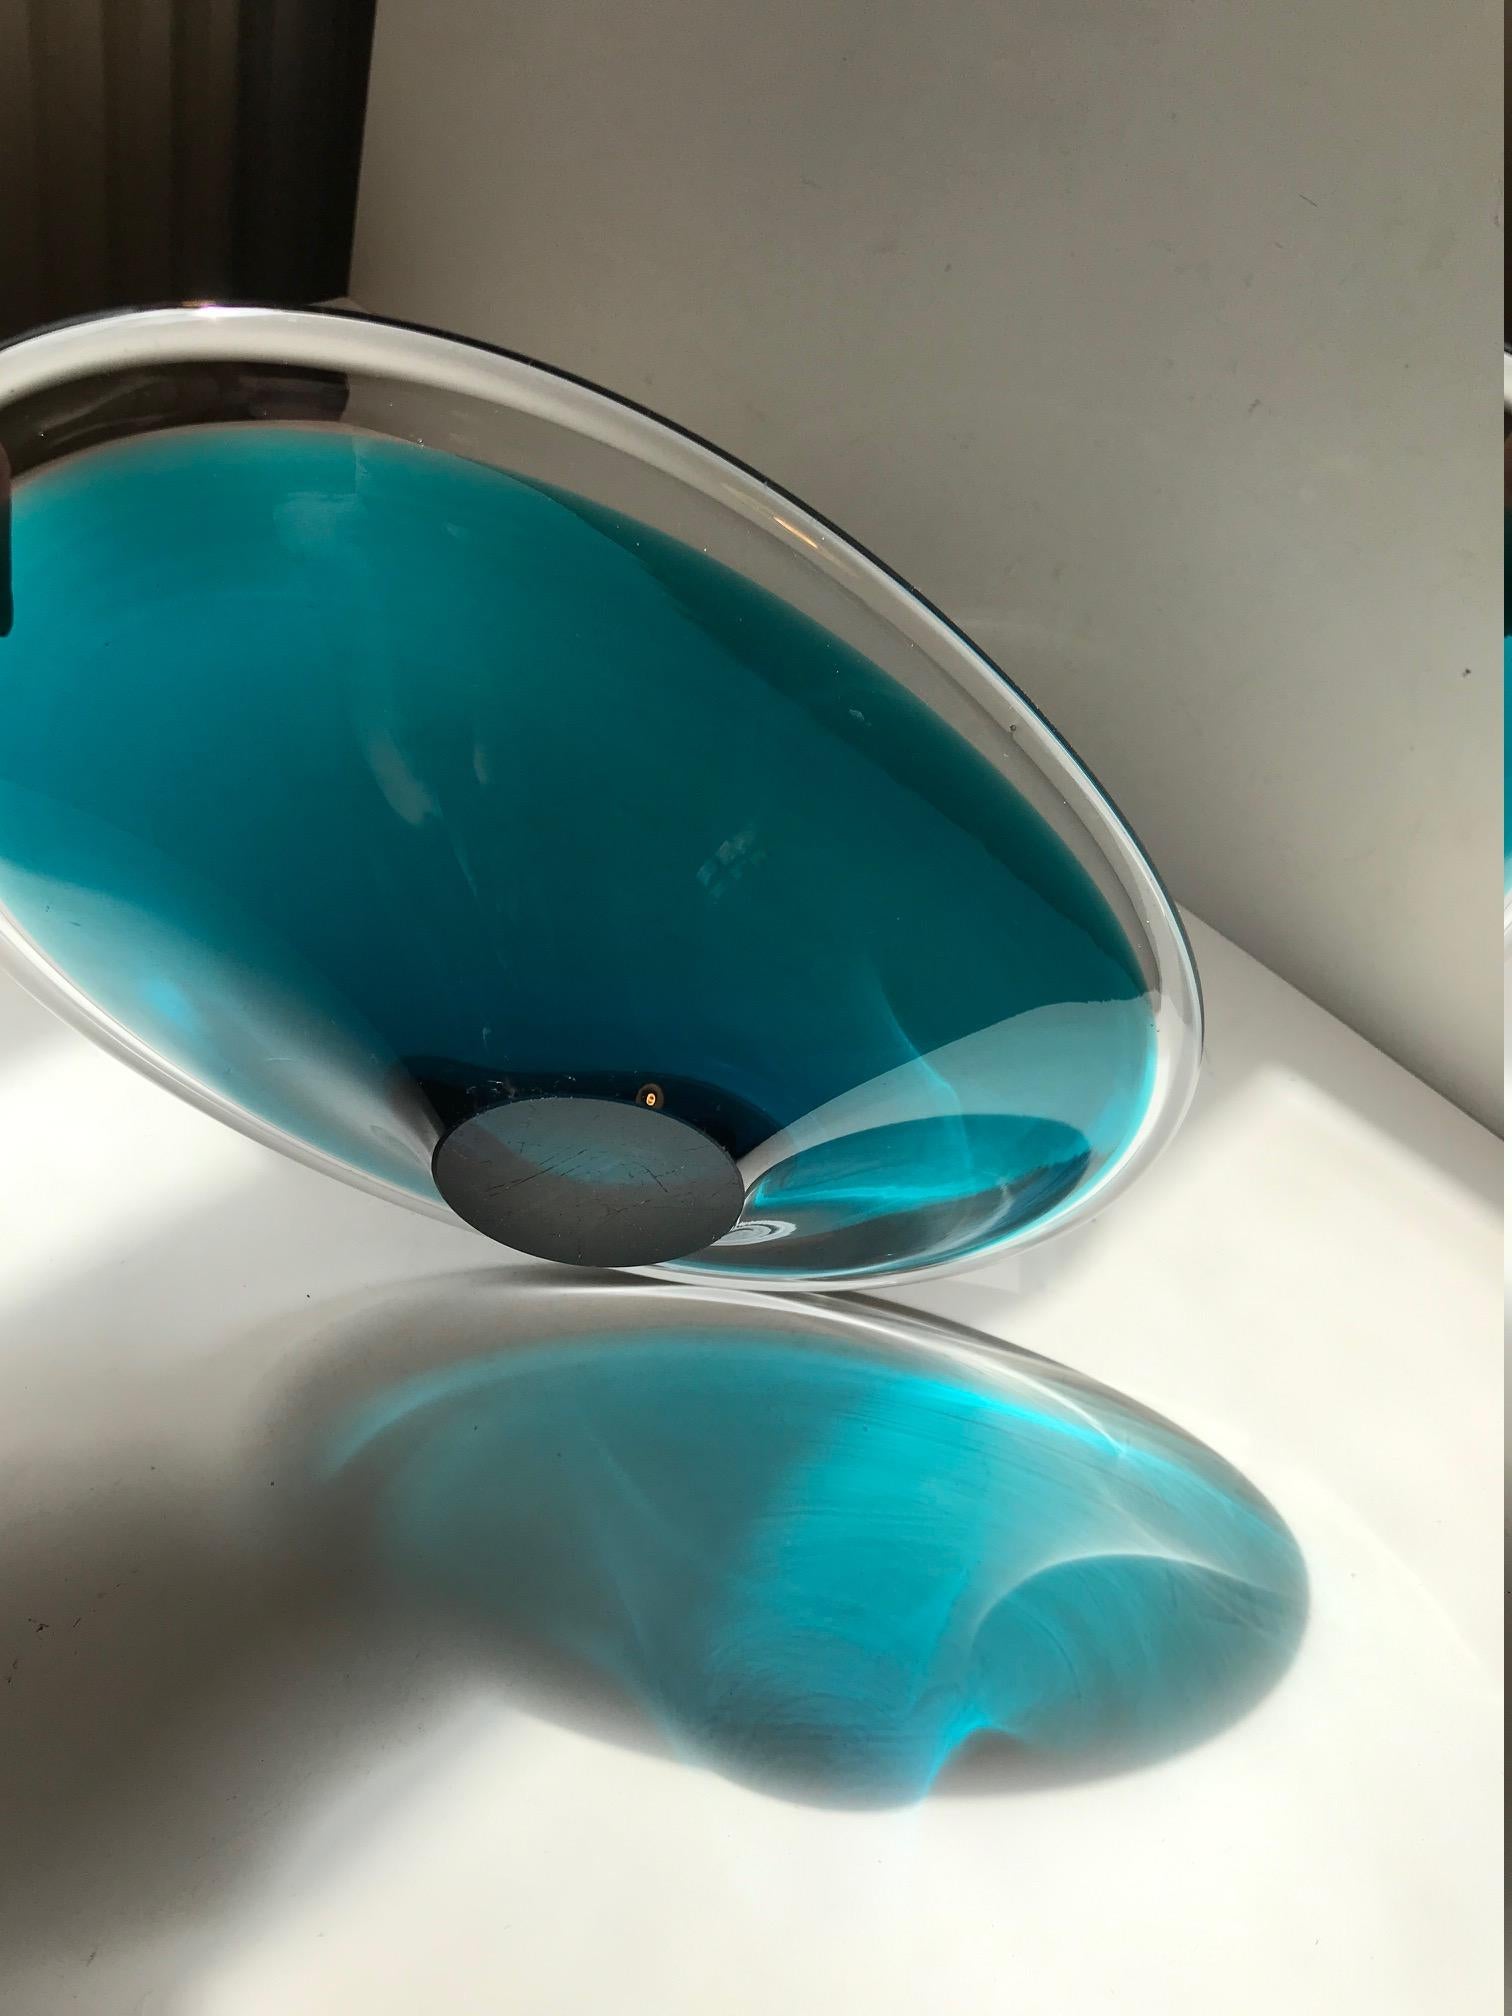 Mid-20th Century Modernist Art Glass Dish by Willy Johansson for Hadeland, Norway, 1960s For Sale